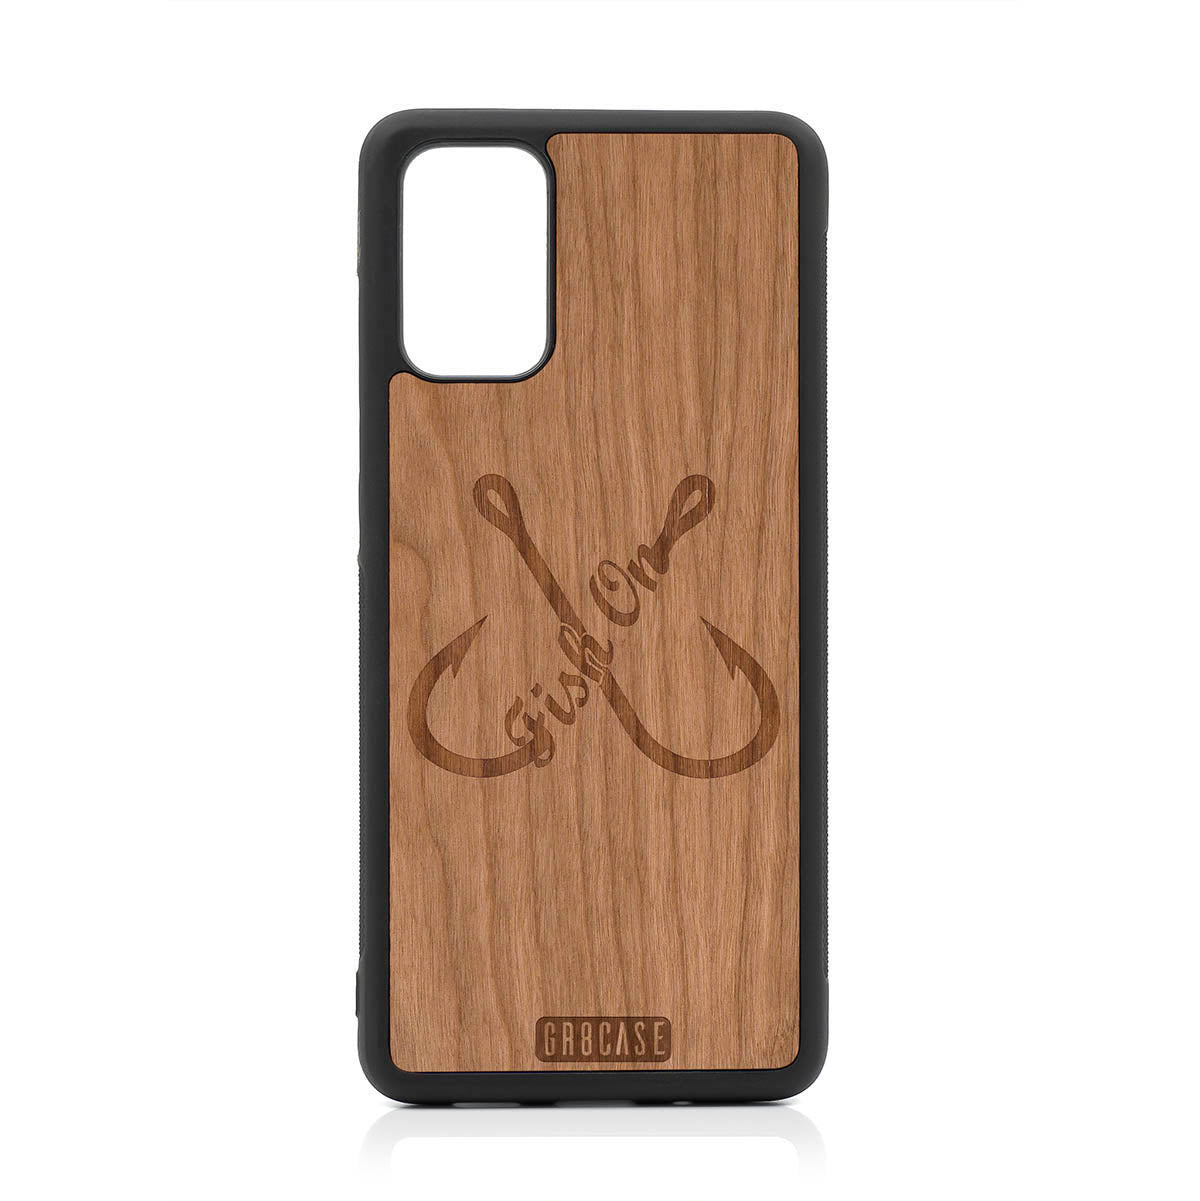 Fish On (Fish Hooks) Design Wood Case For Samsung Galaxy S20 Plus by GR8CASE